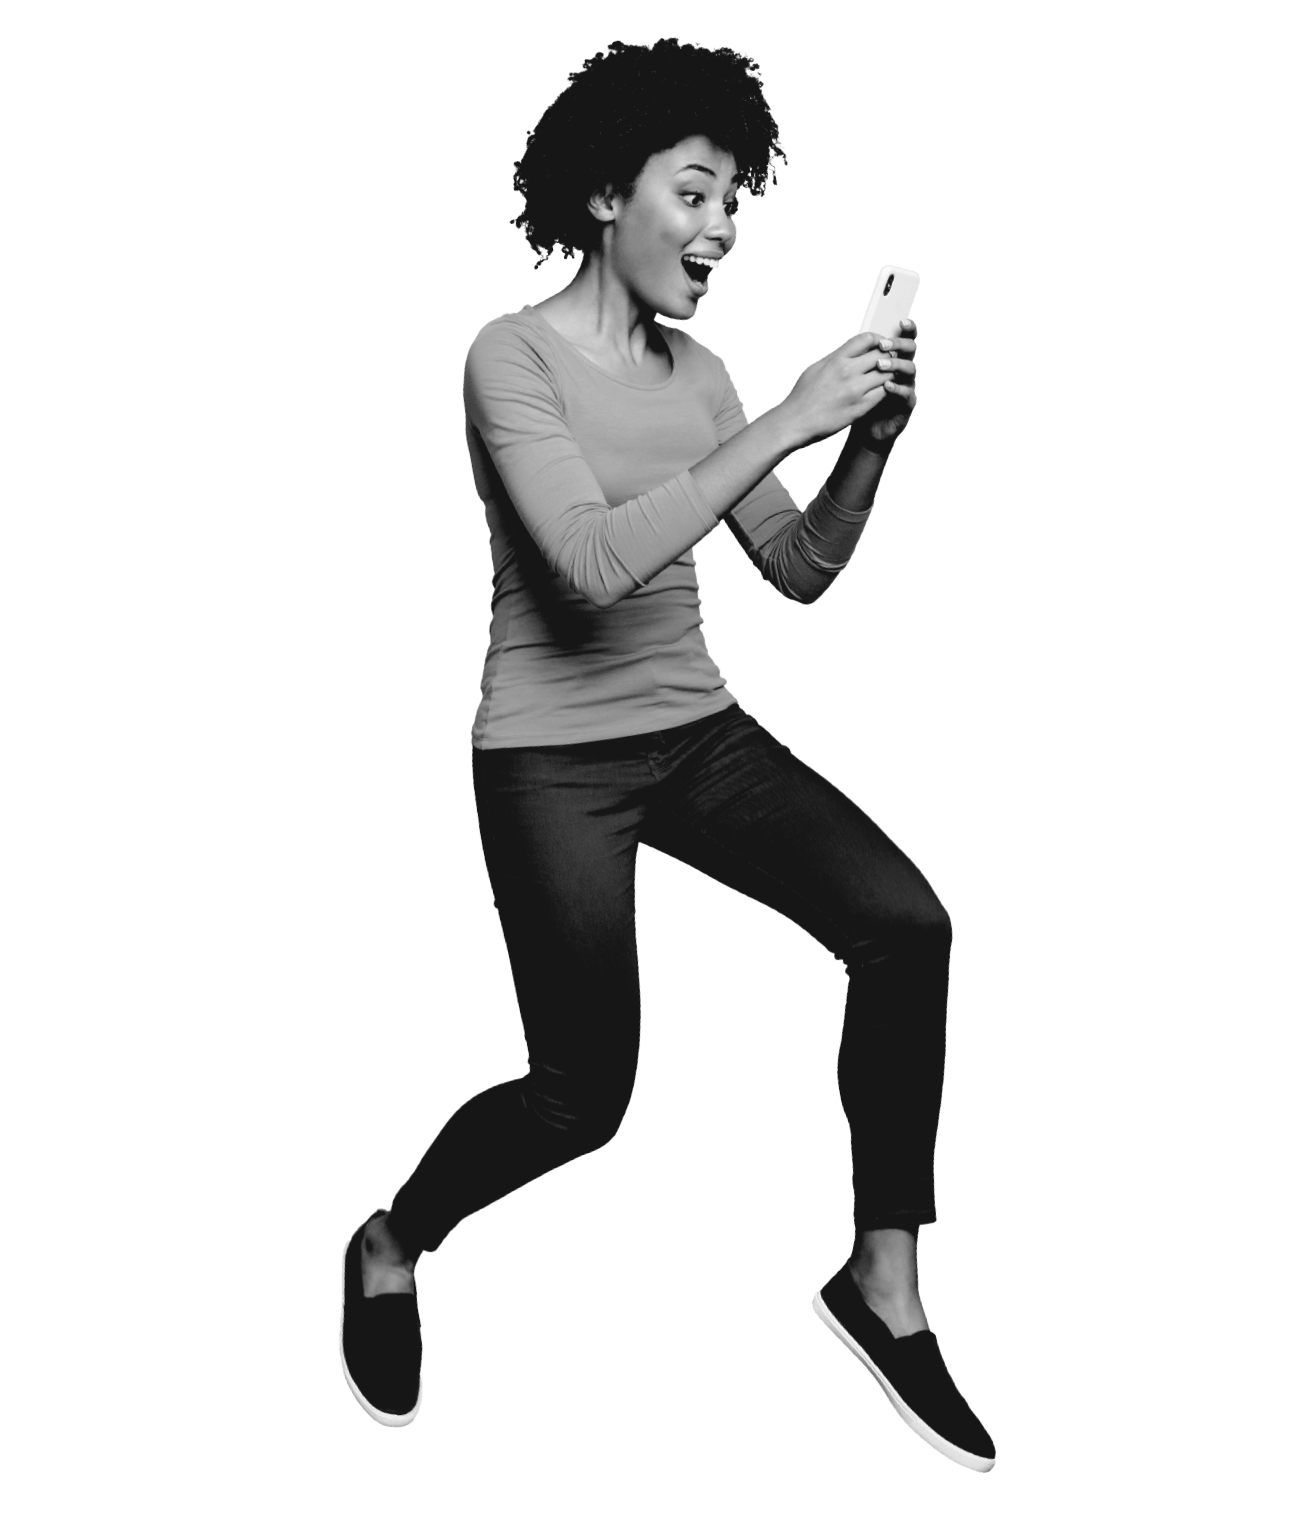 woman black and white jumping on her phone